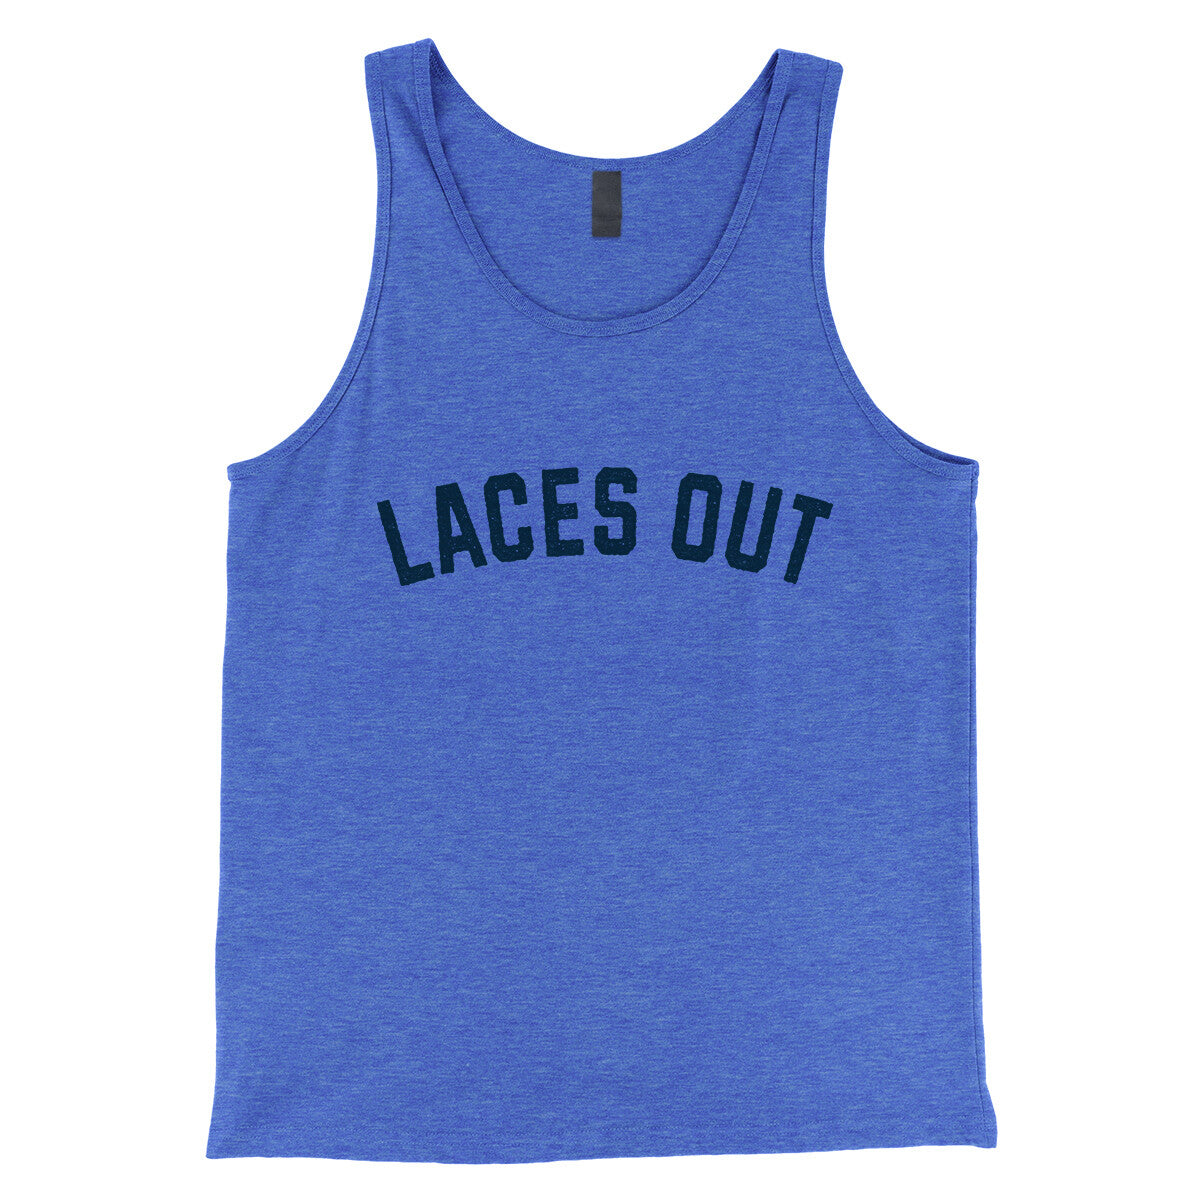 Laces Out in True Royal TriBlend Color